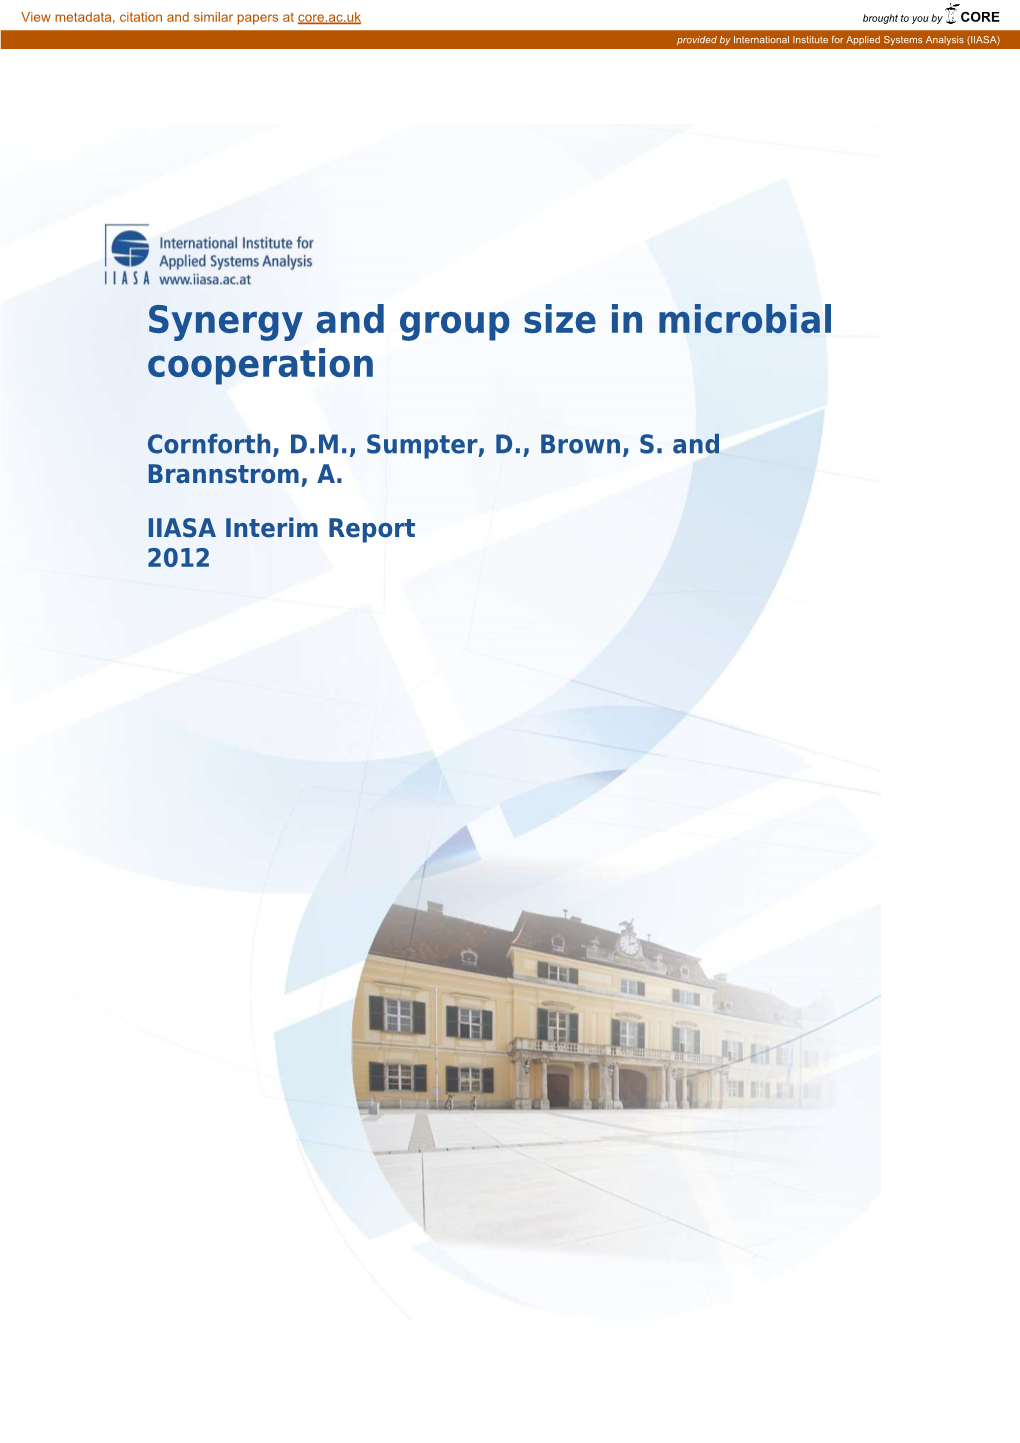 Synergy and Group Size in Microbial Cooperation